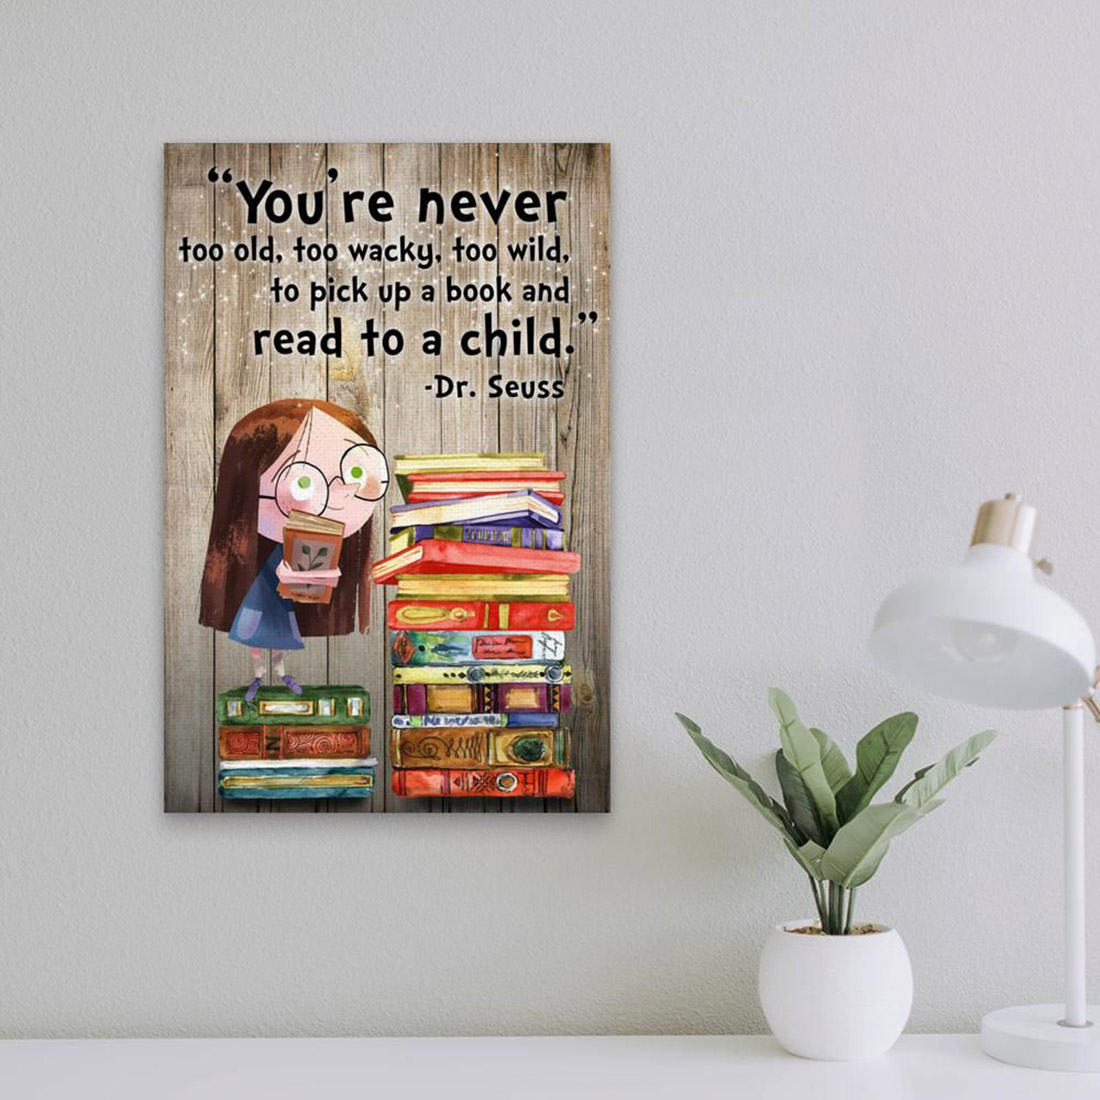 You’re never too old too wacky too wild to pick up a book and read to a child poster